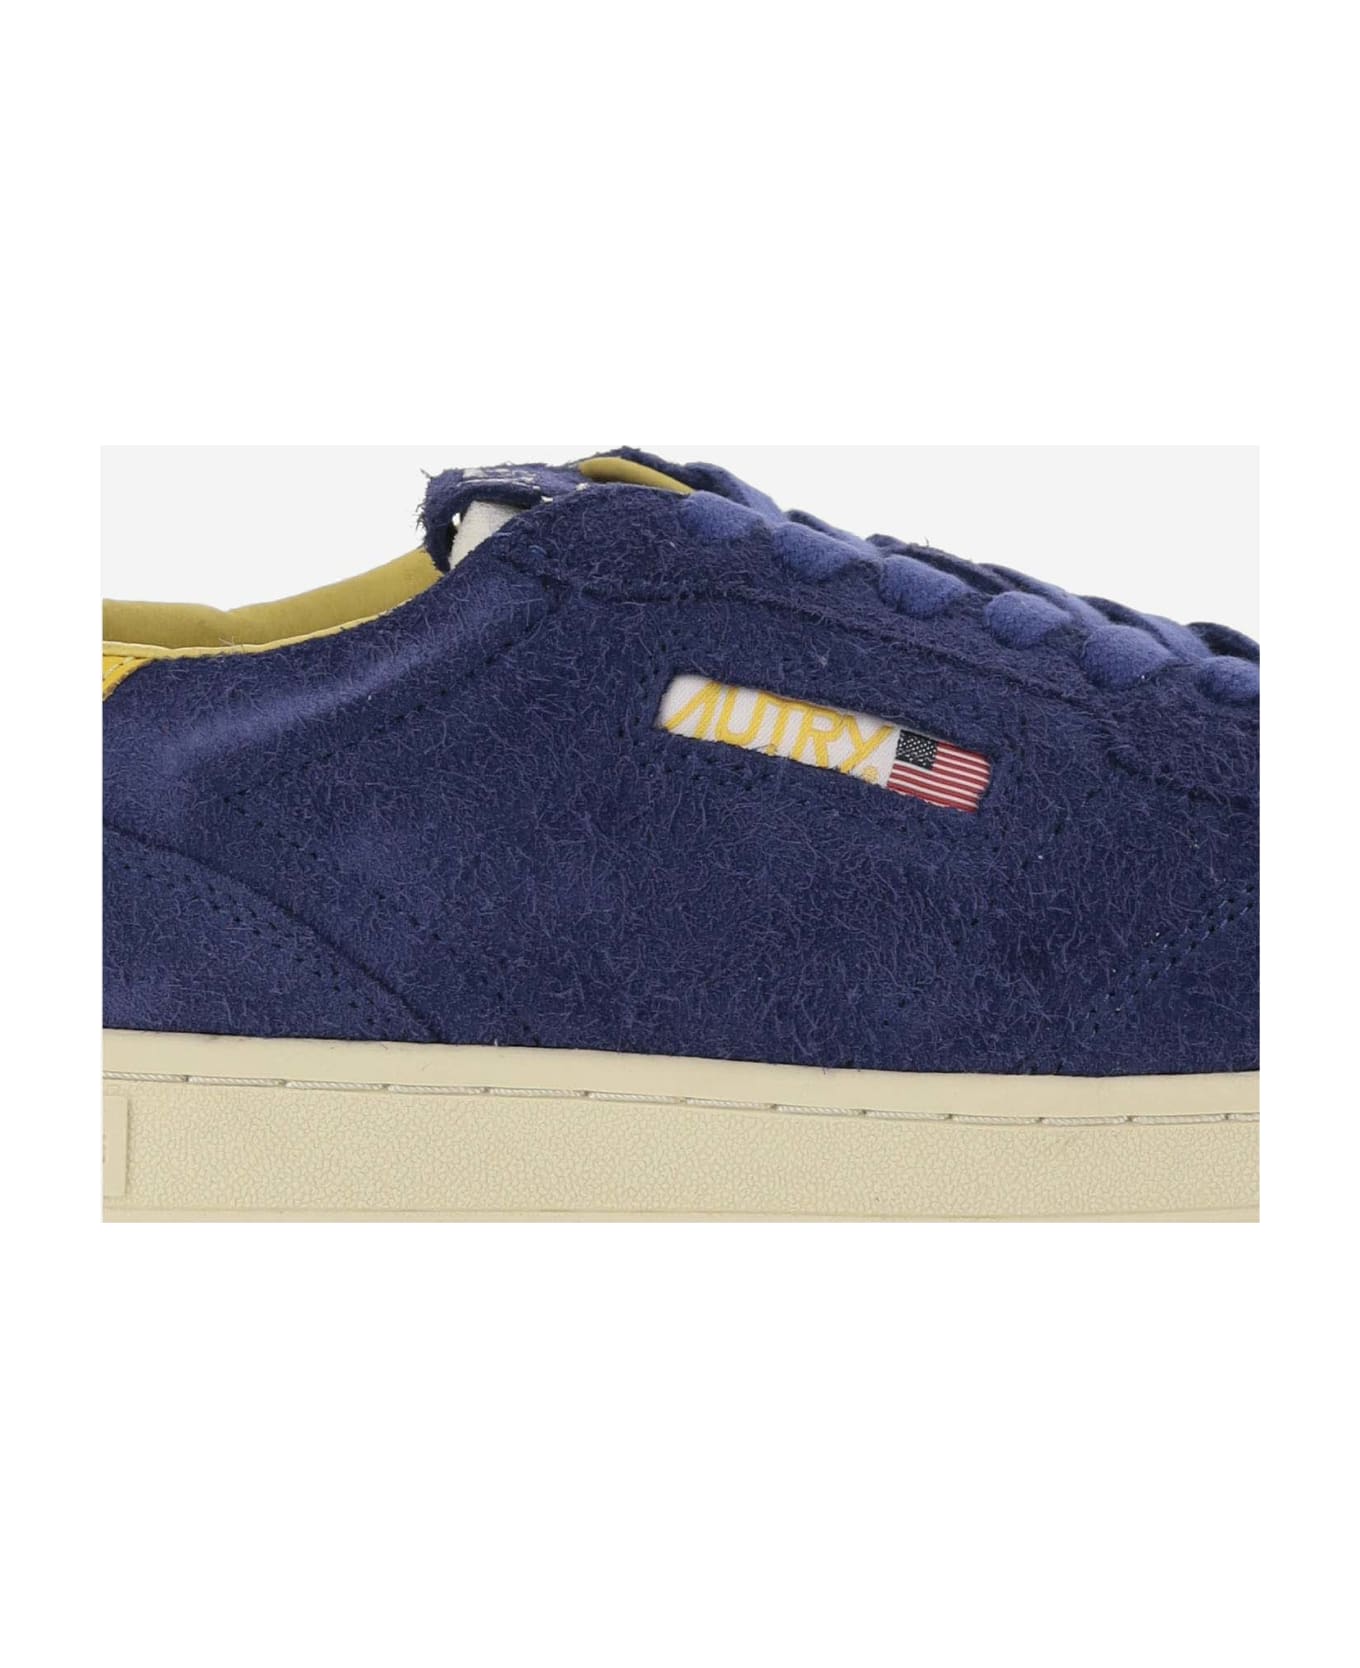 Autry Medalist Low Sneakers In Suede Hair Sand Effect - Lanzuli スニーカー